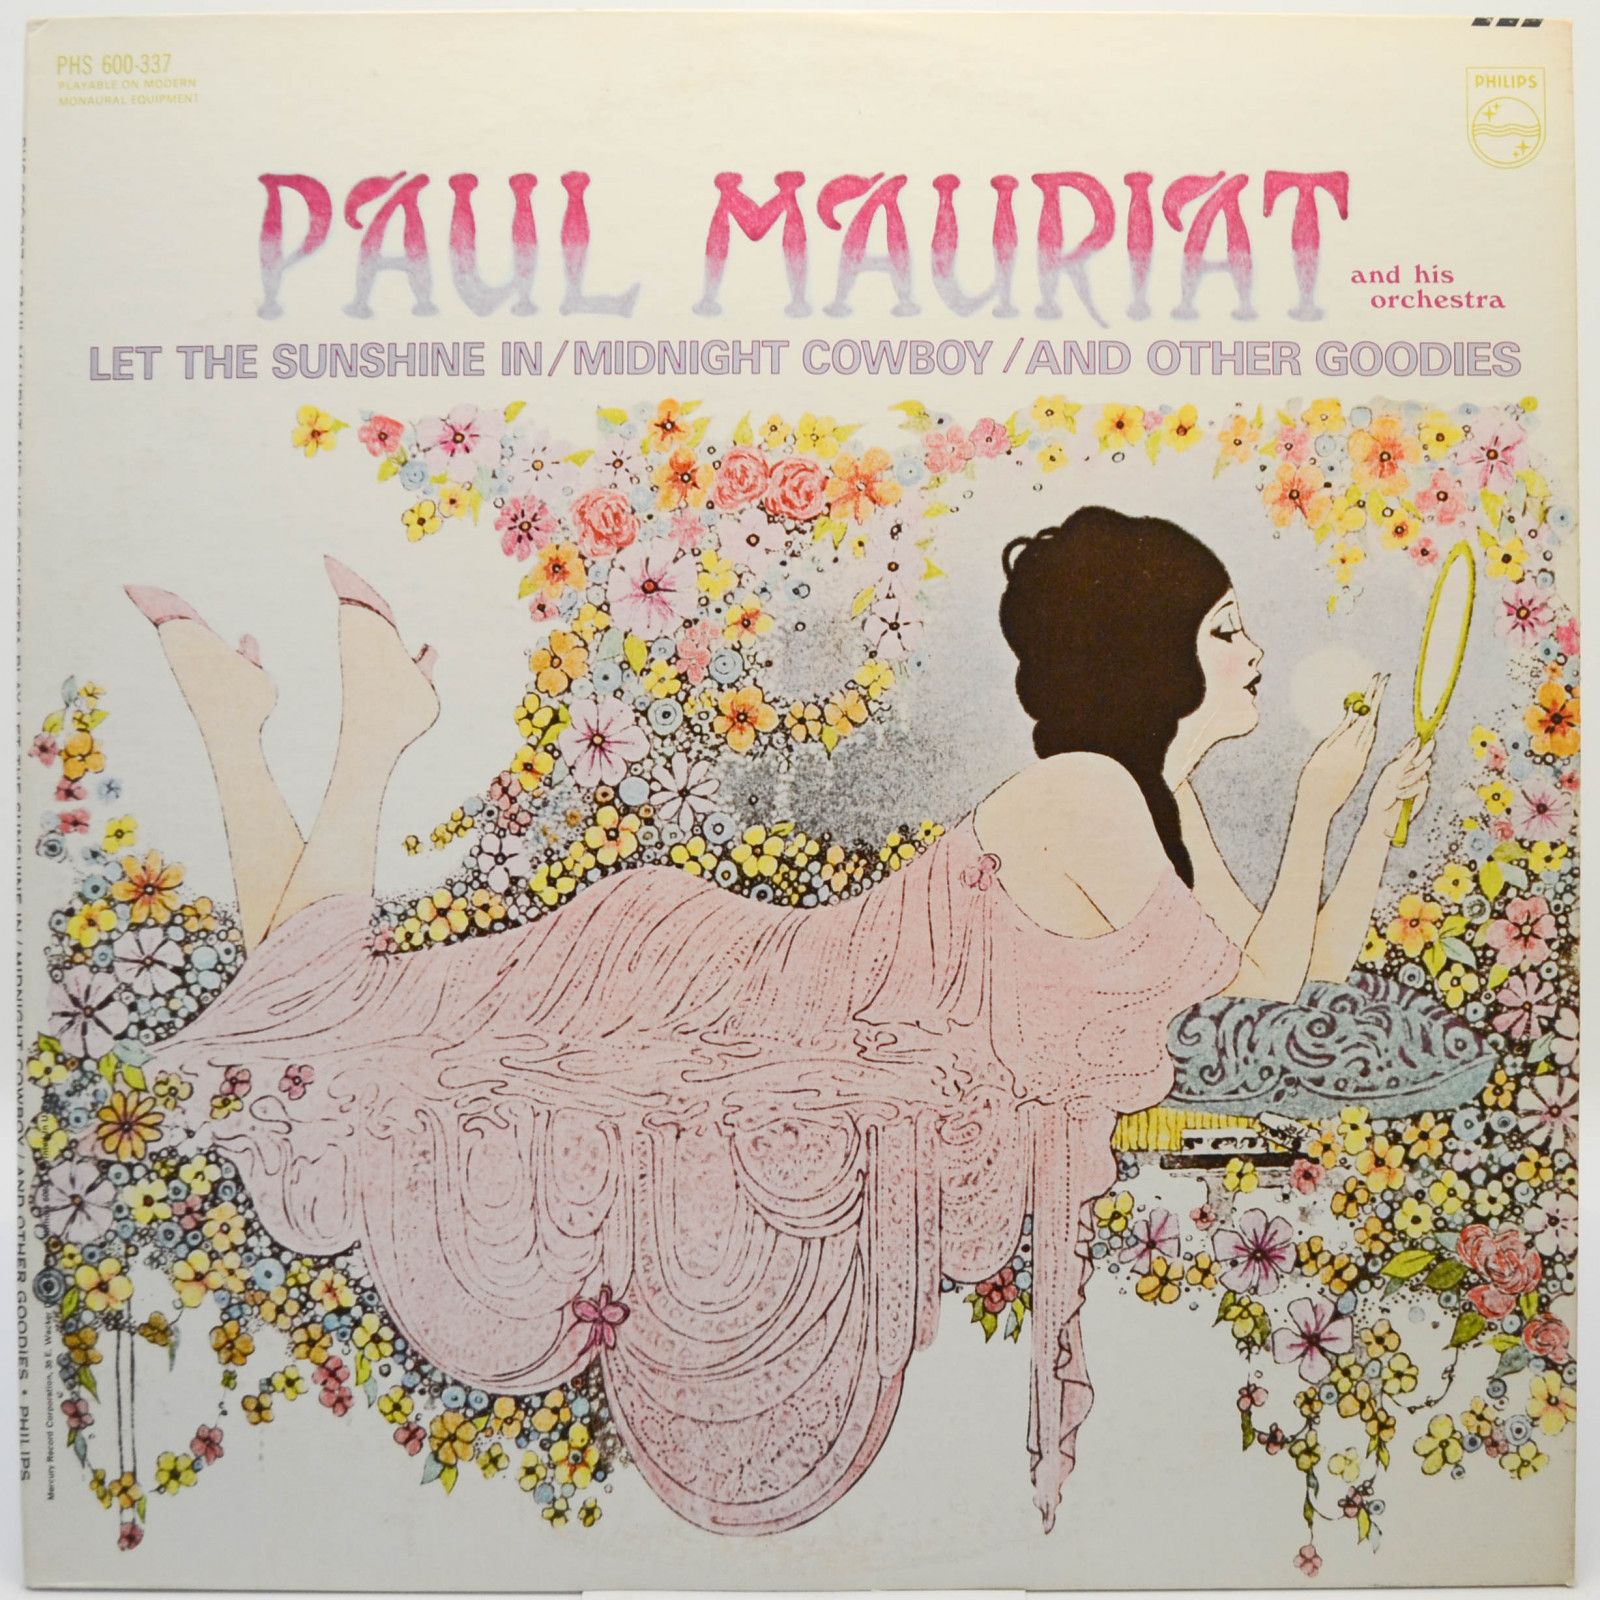 Paul Mauriat And His Orchestra — Let The Sunshine In / Midnight Cowboy / And Other Goodies (USA), 1970